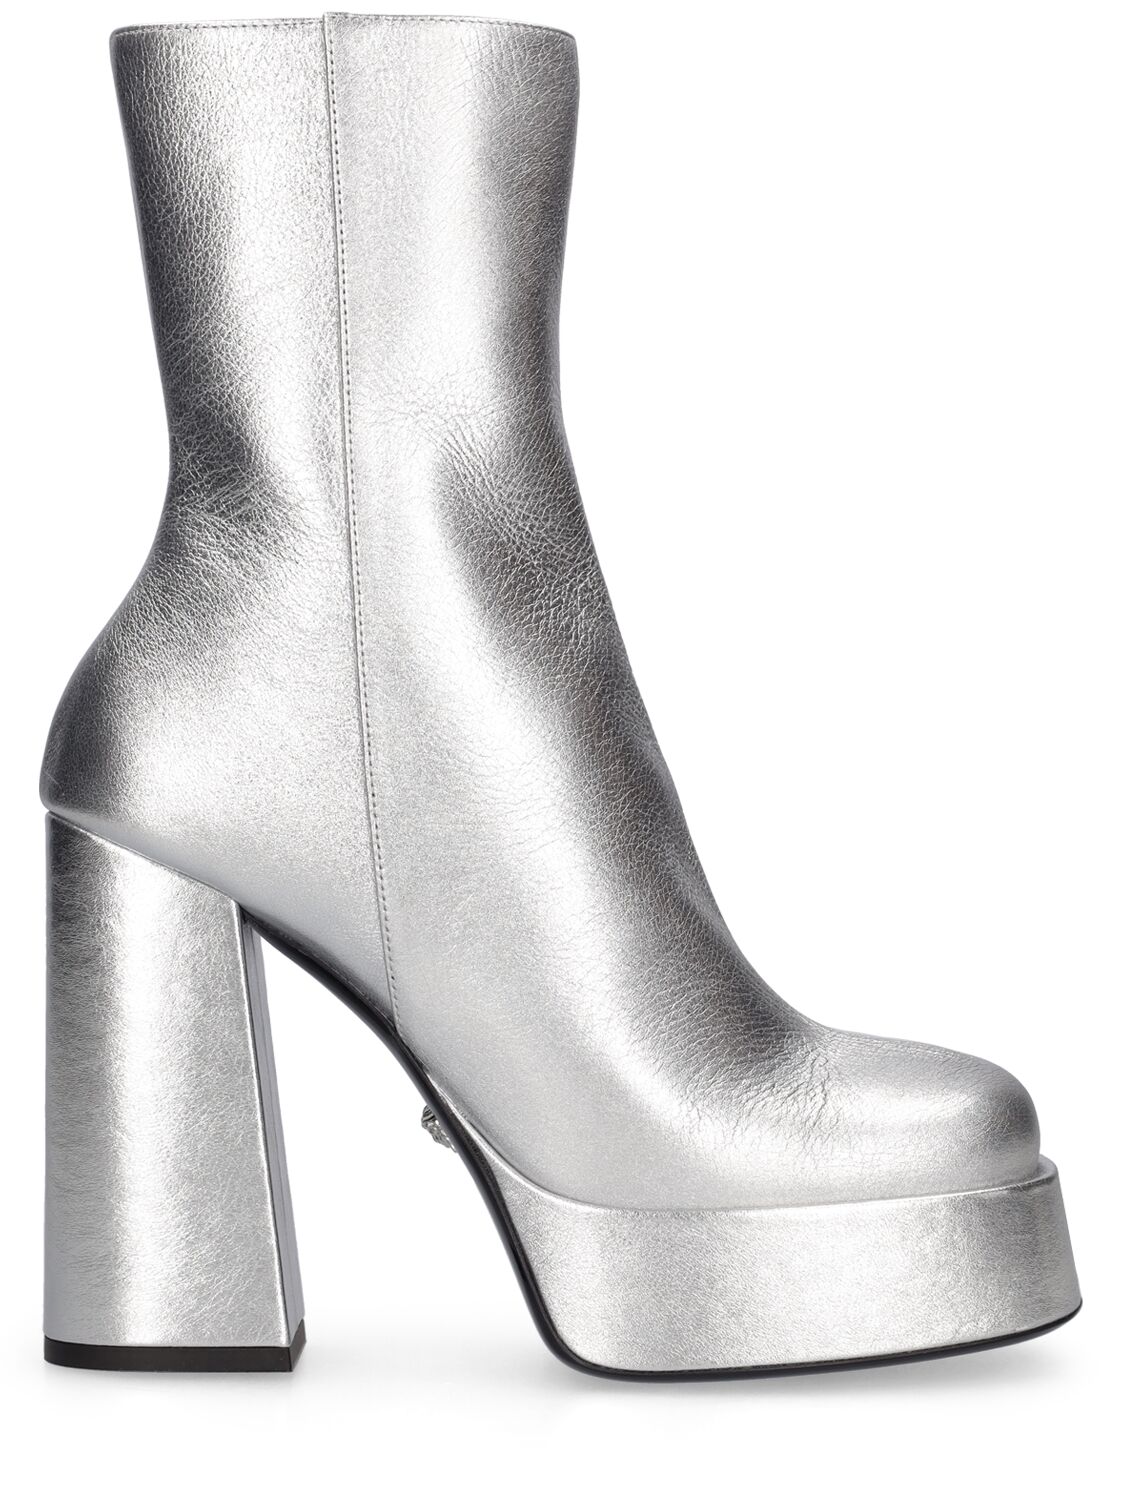 120mm Metallic Leather Boots